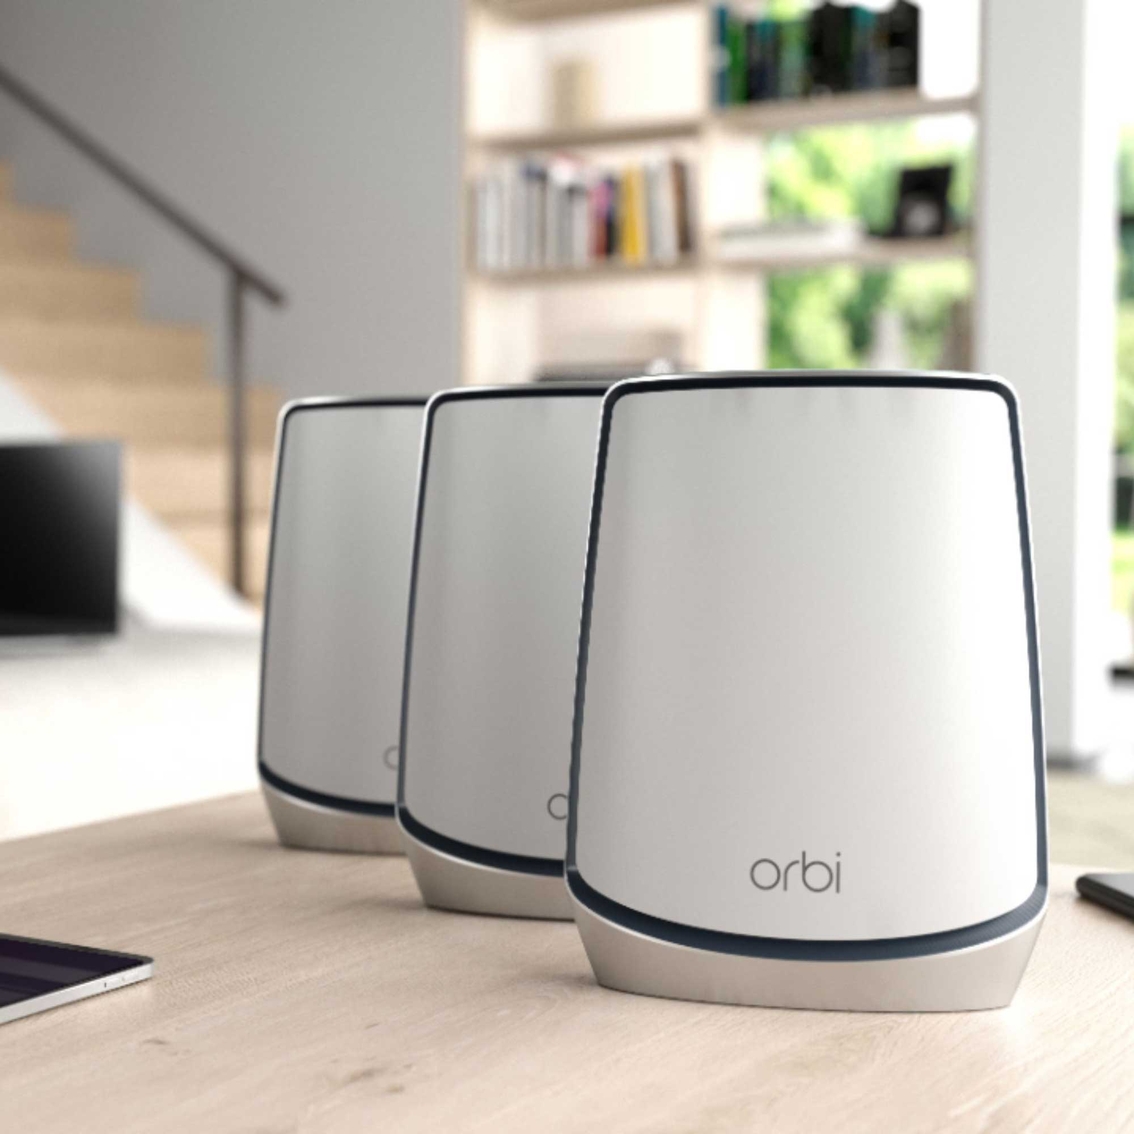 Netgear Orbi Tri-band Mesh WiFi 6 System with 6Gbps Router + 2 Satellites - Image 4 of 8